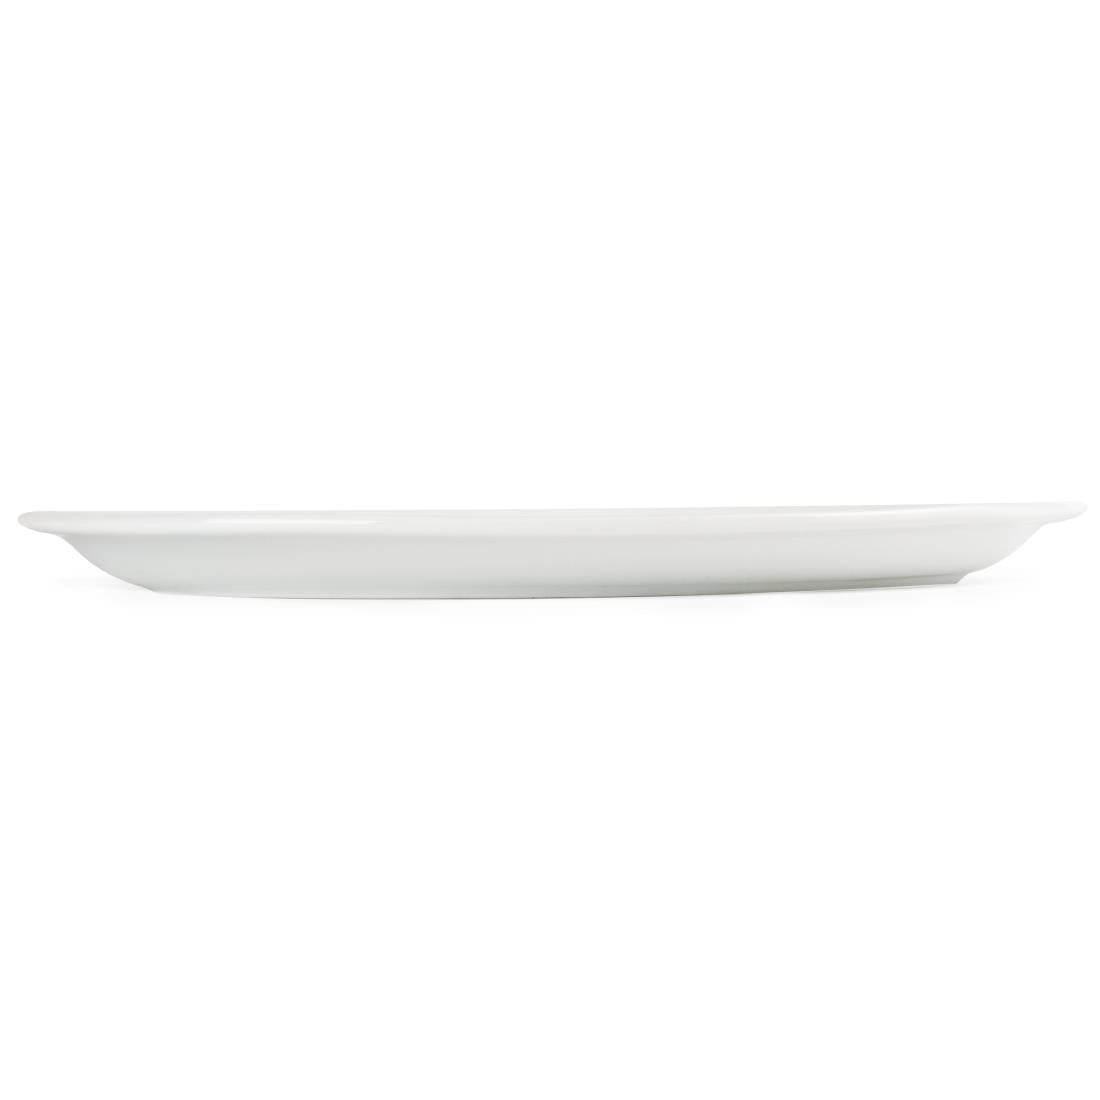 CB484 Olympia Whiteware Oval Platters 295mm (Pack of 6)